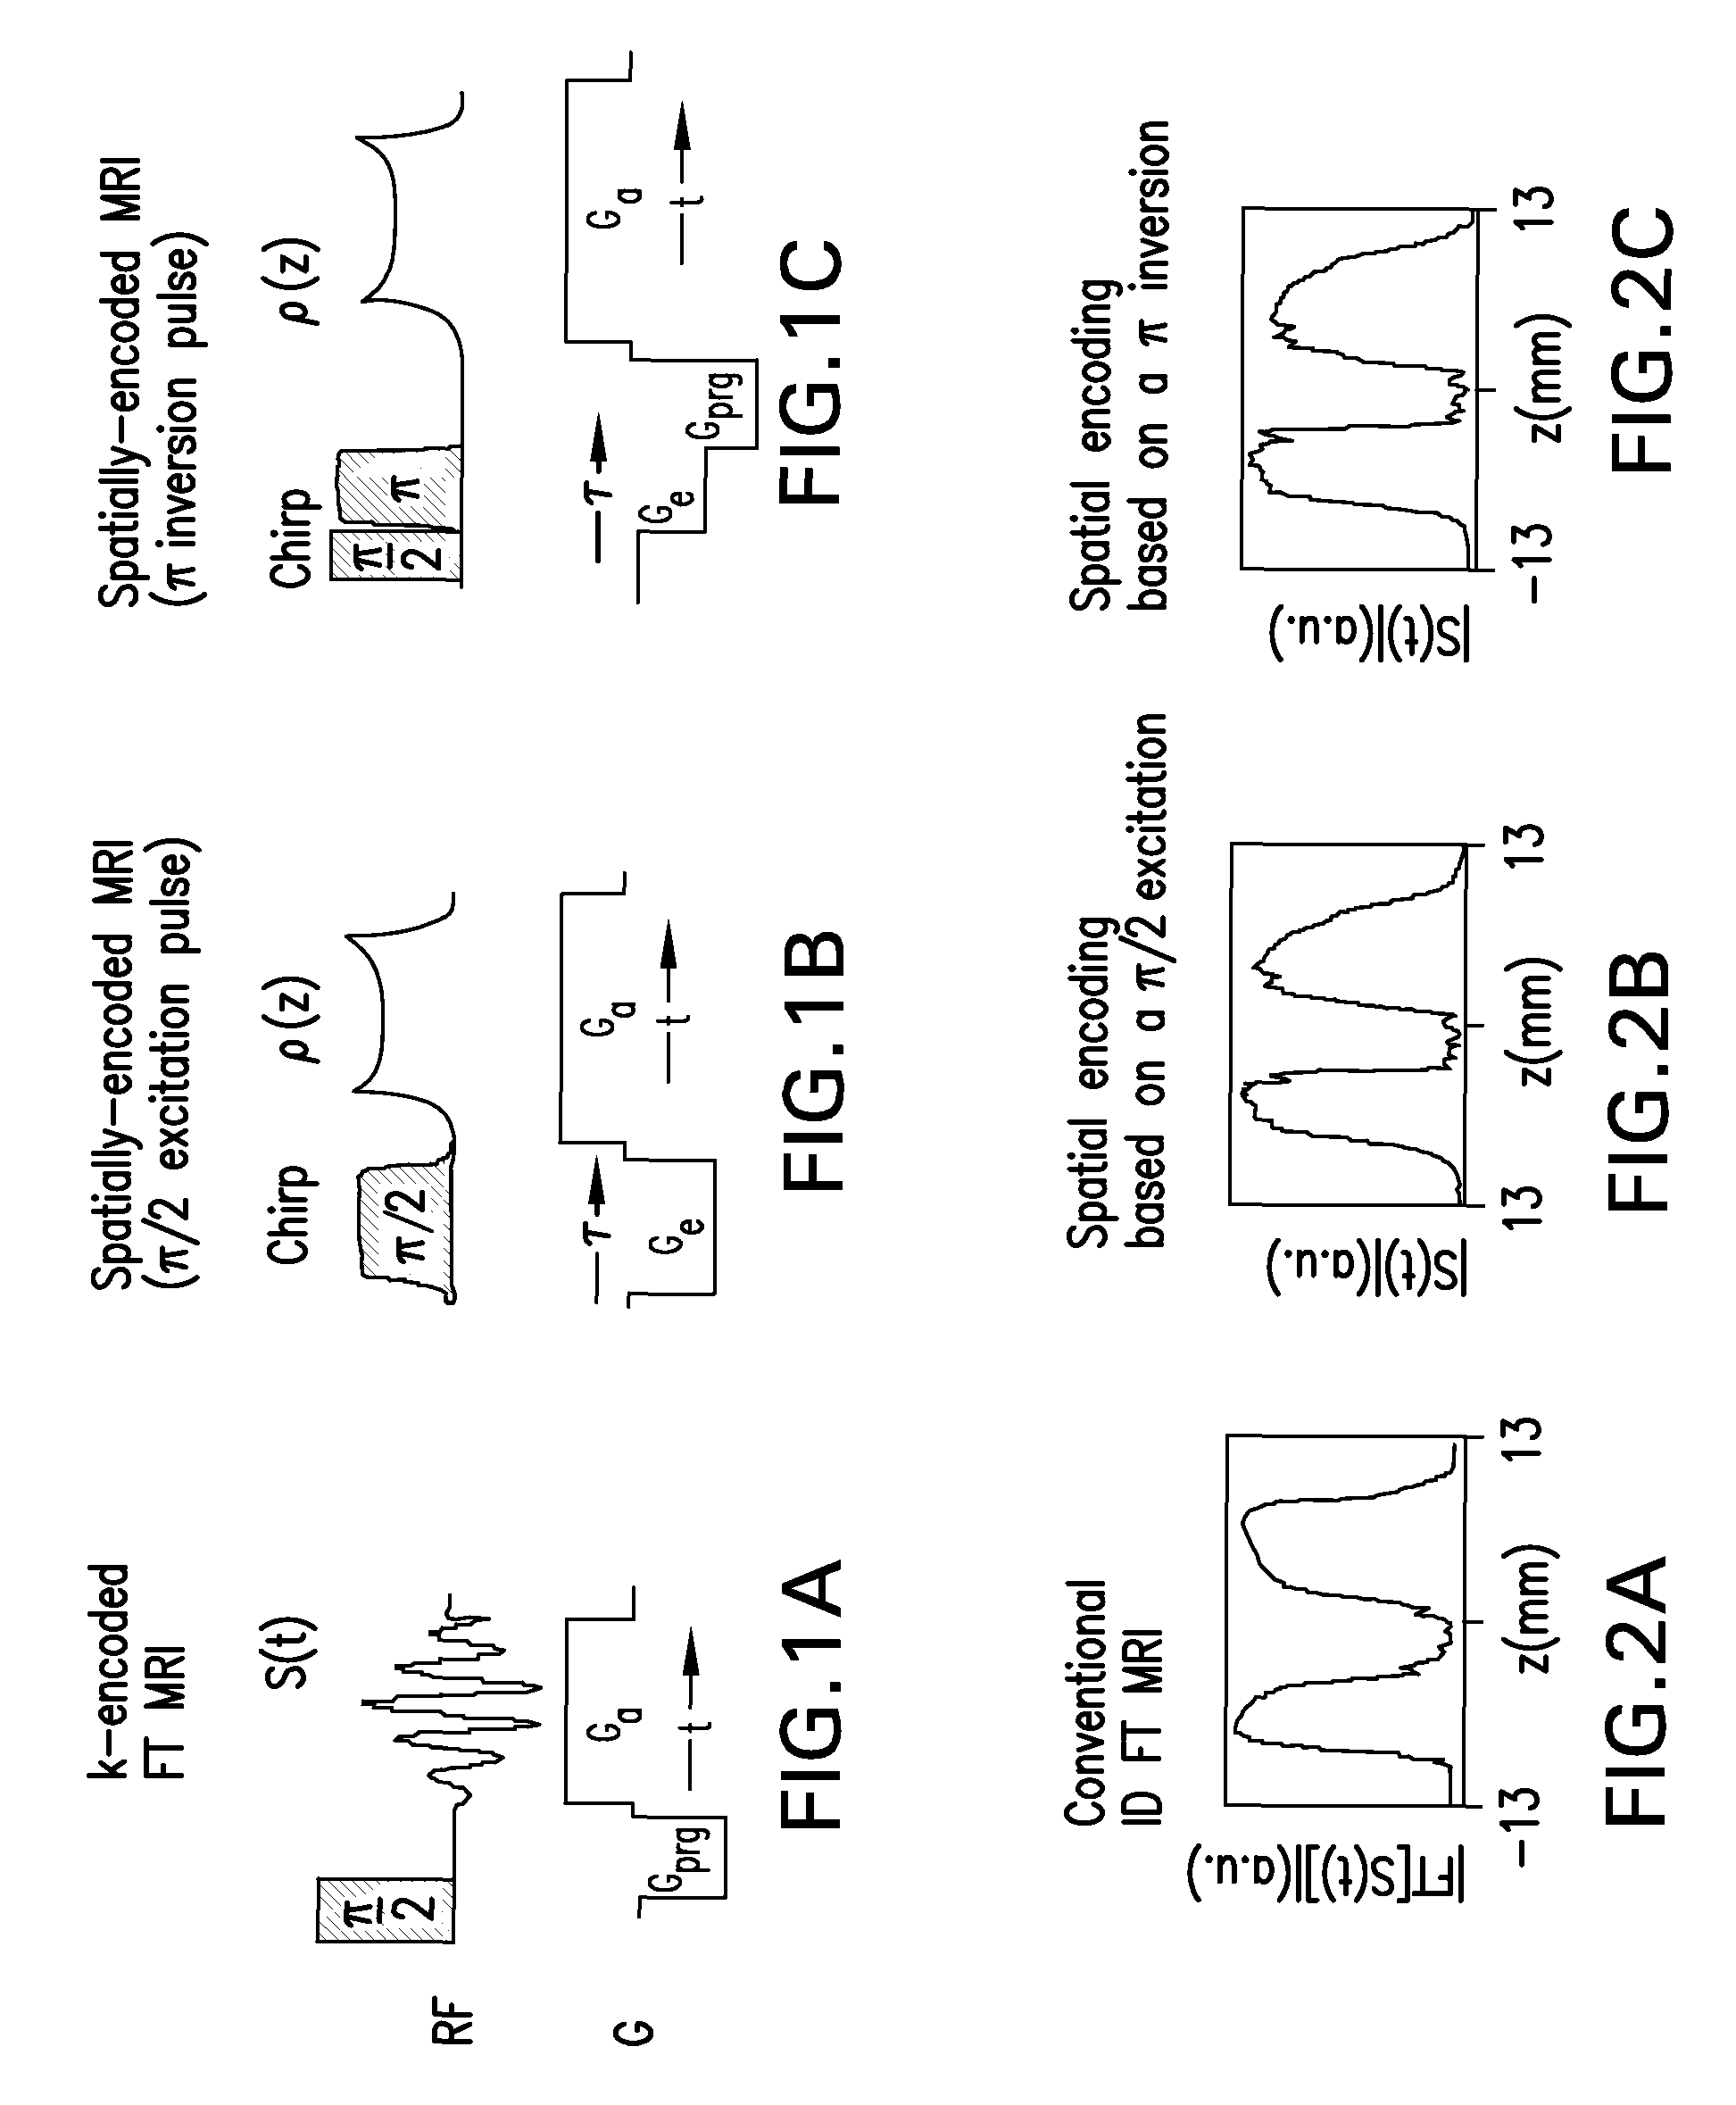 Method and apparatus for acquiring high resolution spectral data or high definition images in inhomogeneous environments